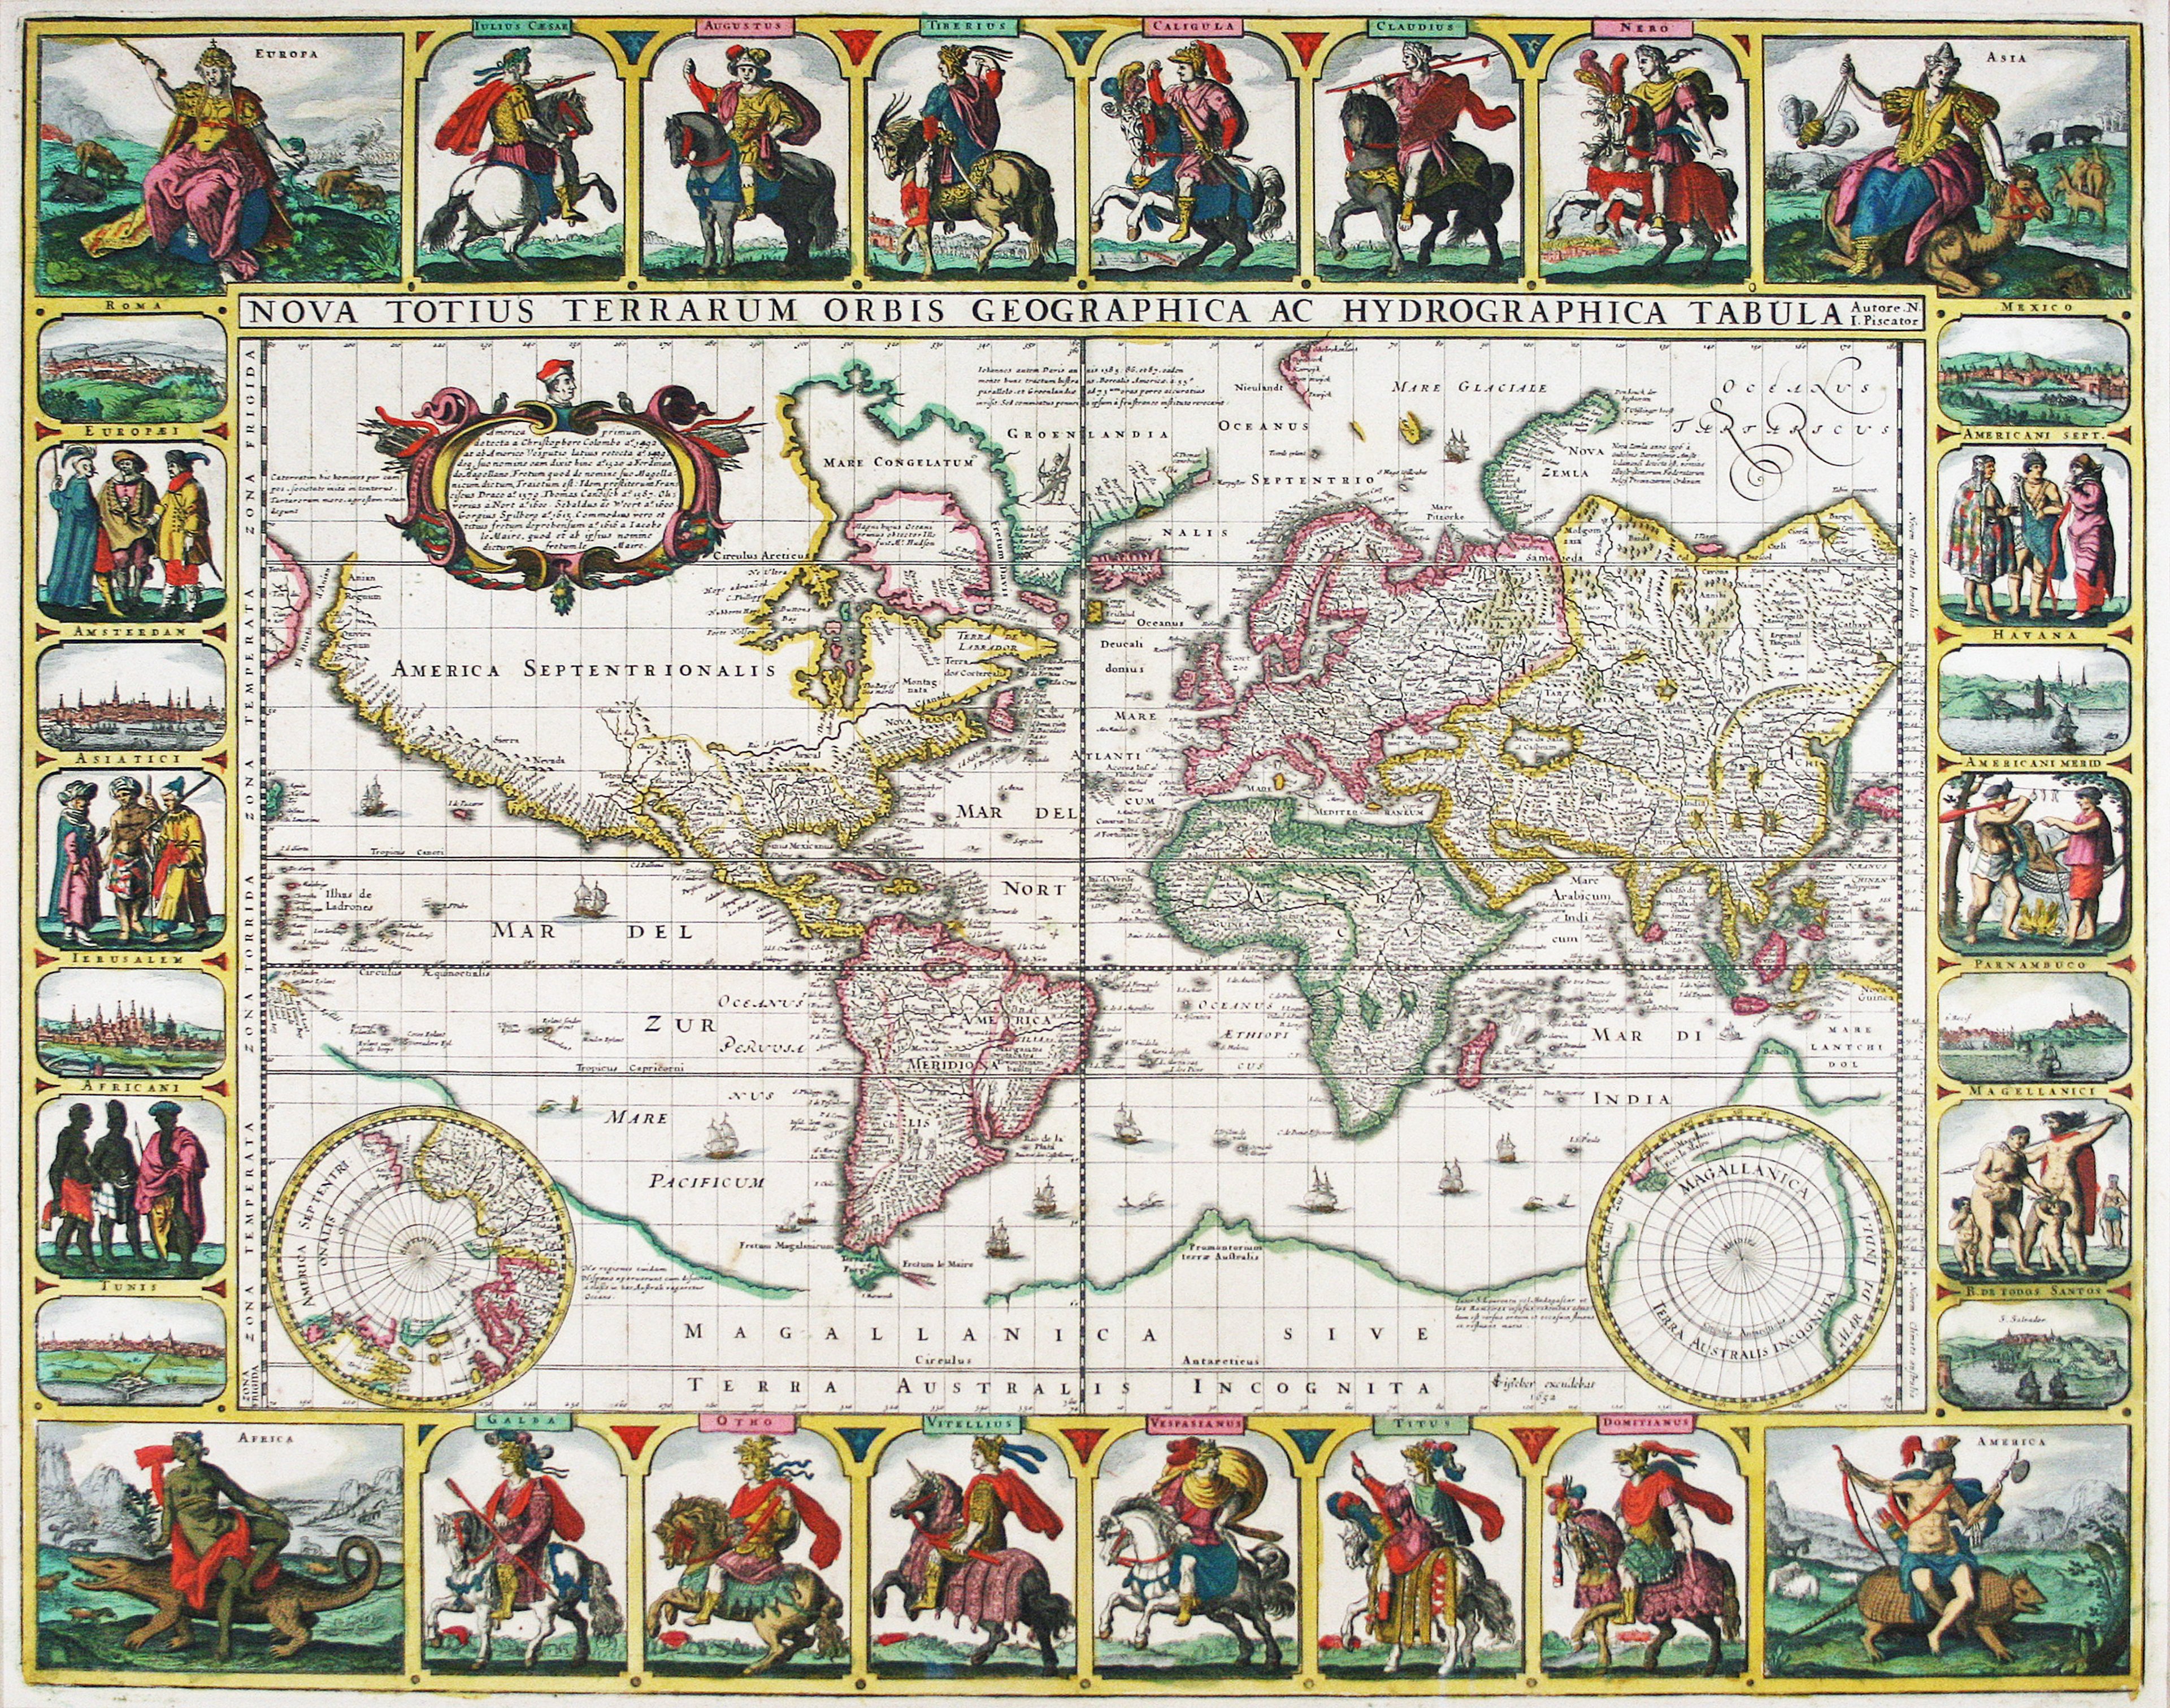 Mercator Projection of a world map from the Dutch Golden Age with ornate illustrations of men on horses around the top and bottom of the map, and different figures from around the world along the right and lefthand sides.